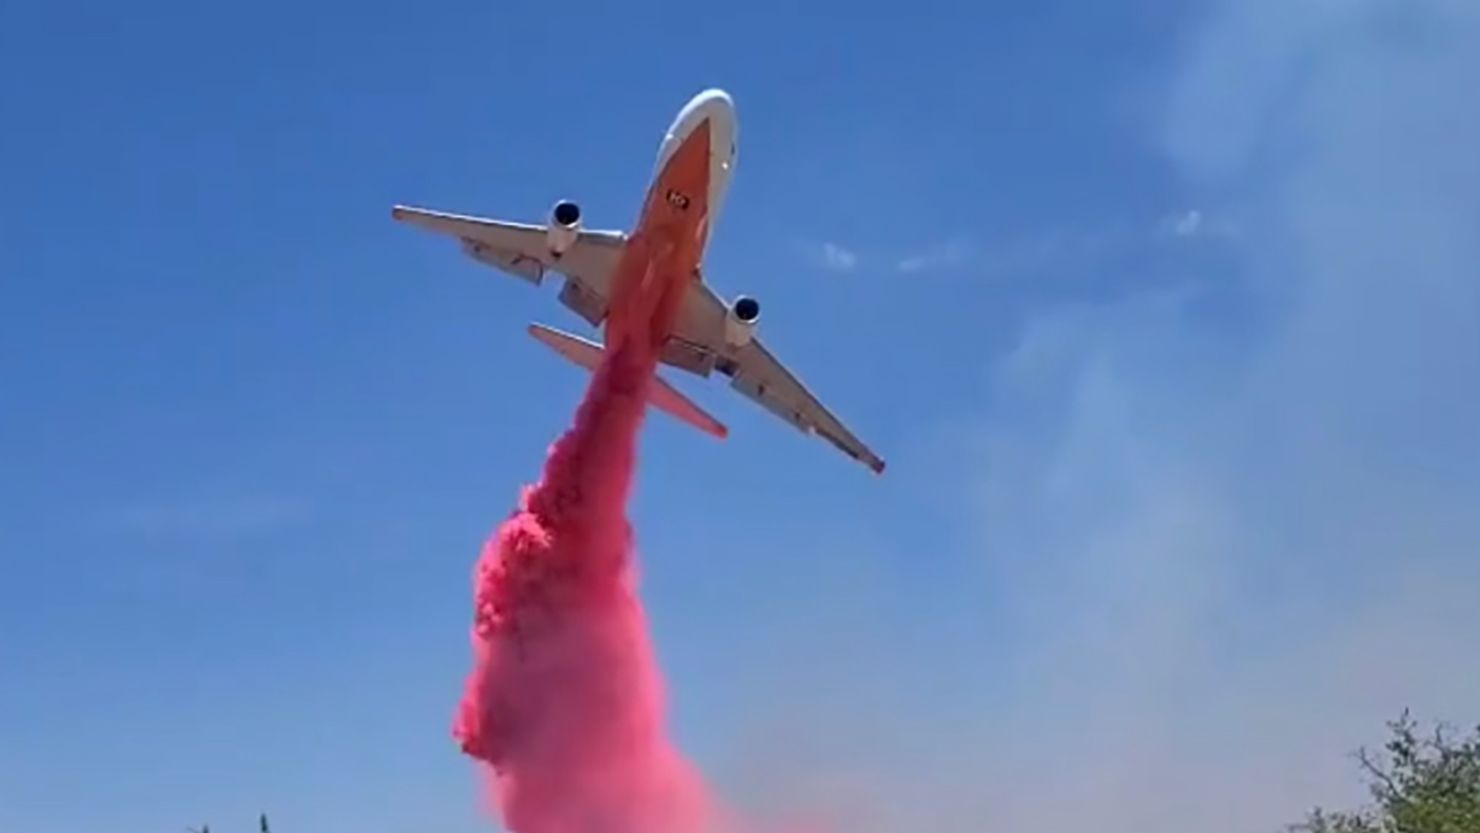 Aircraft support the hand crews and engines on the Adams Robles Complex fires in southeastern Arizona.